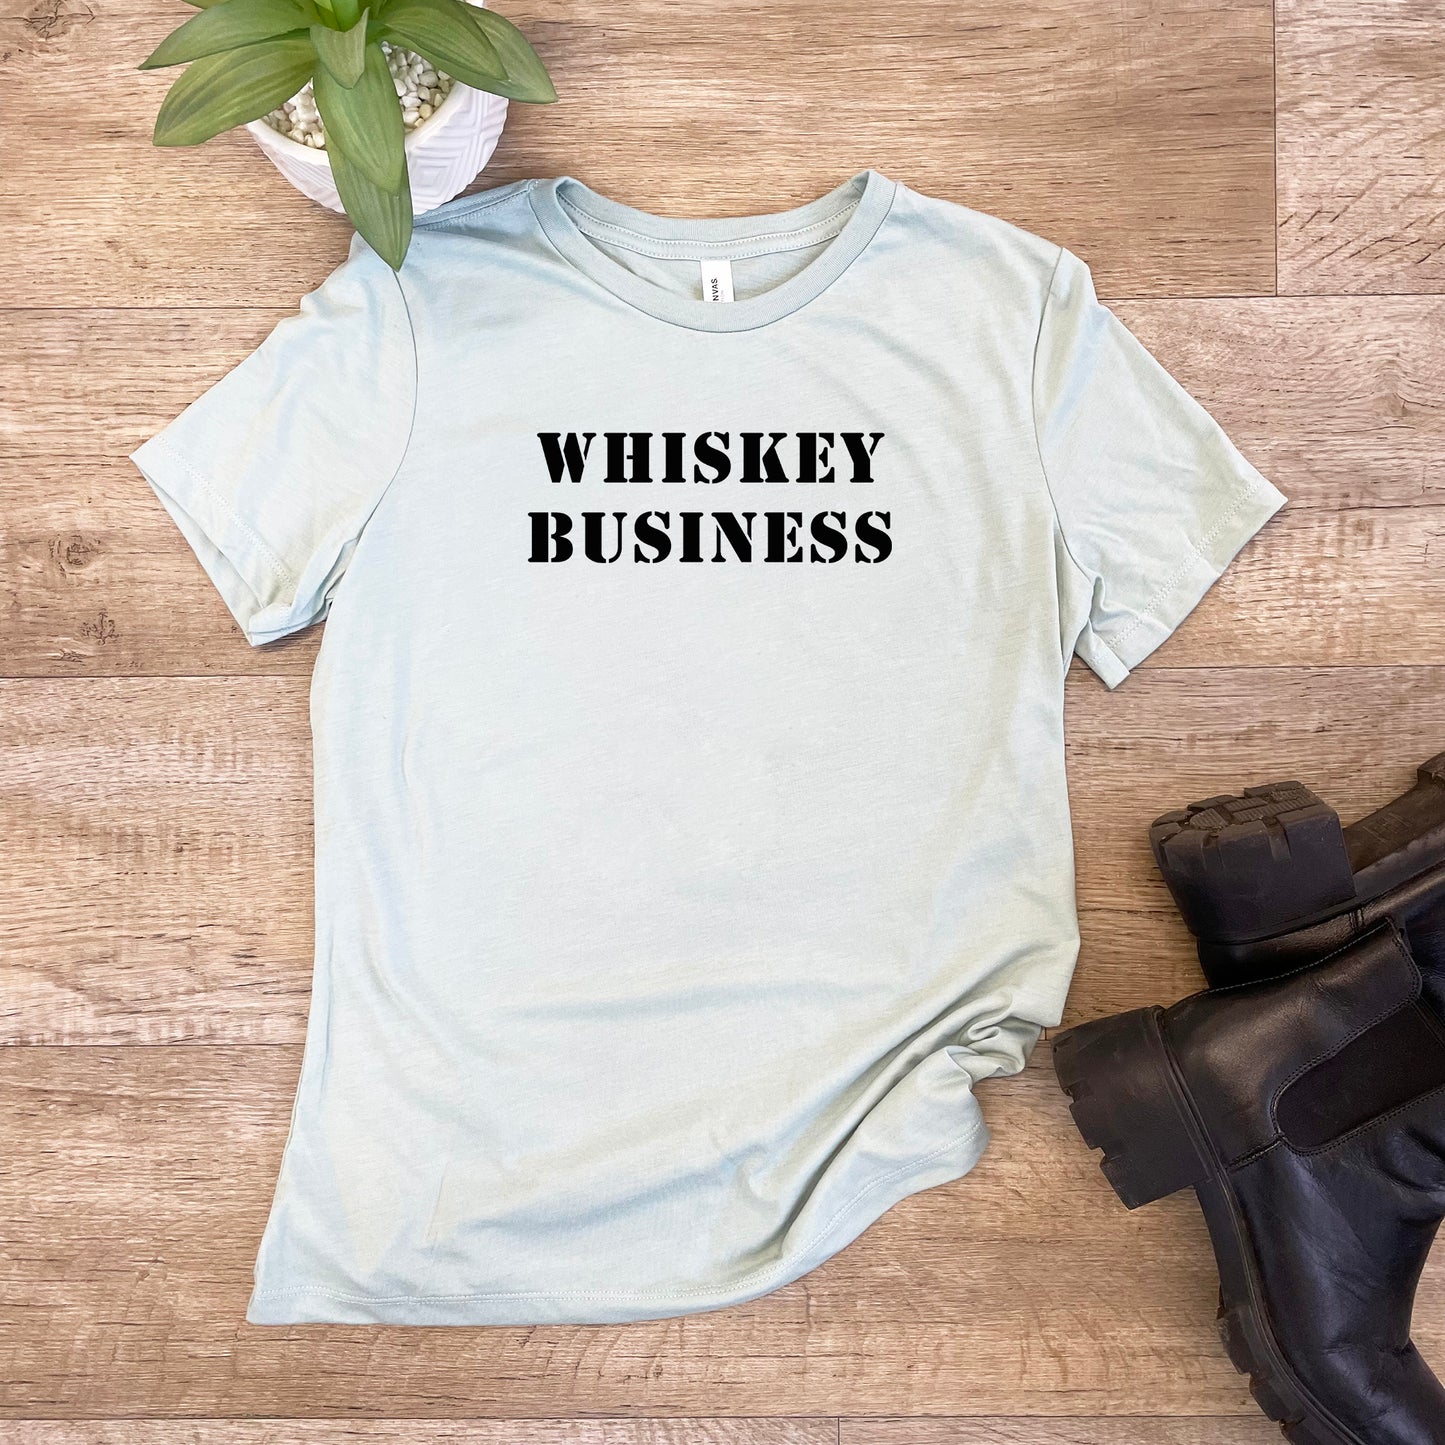 Whiskey Business - Women's Crew Tee - Olive or Dusty Blue